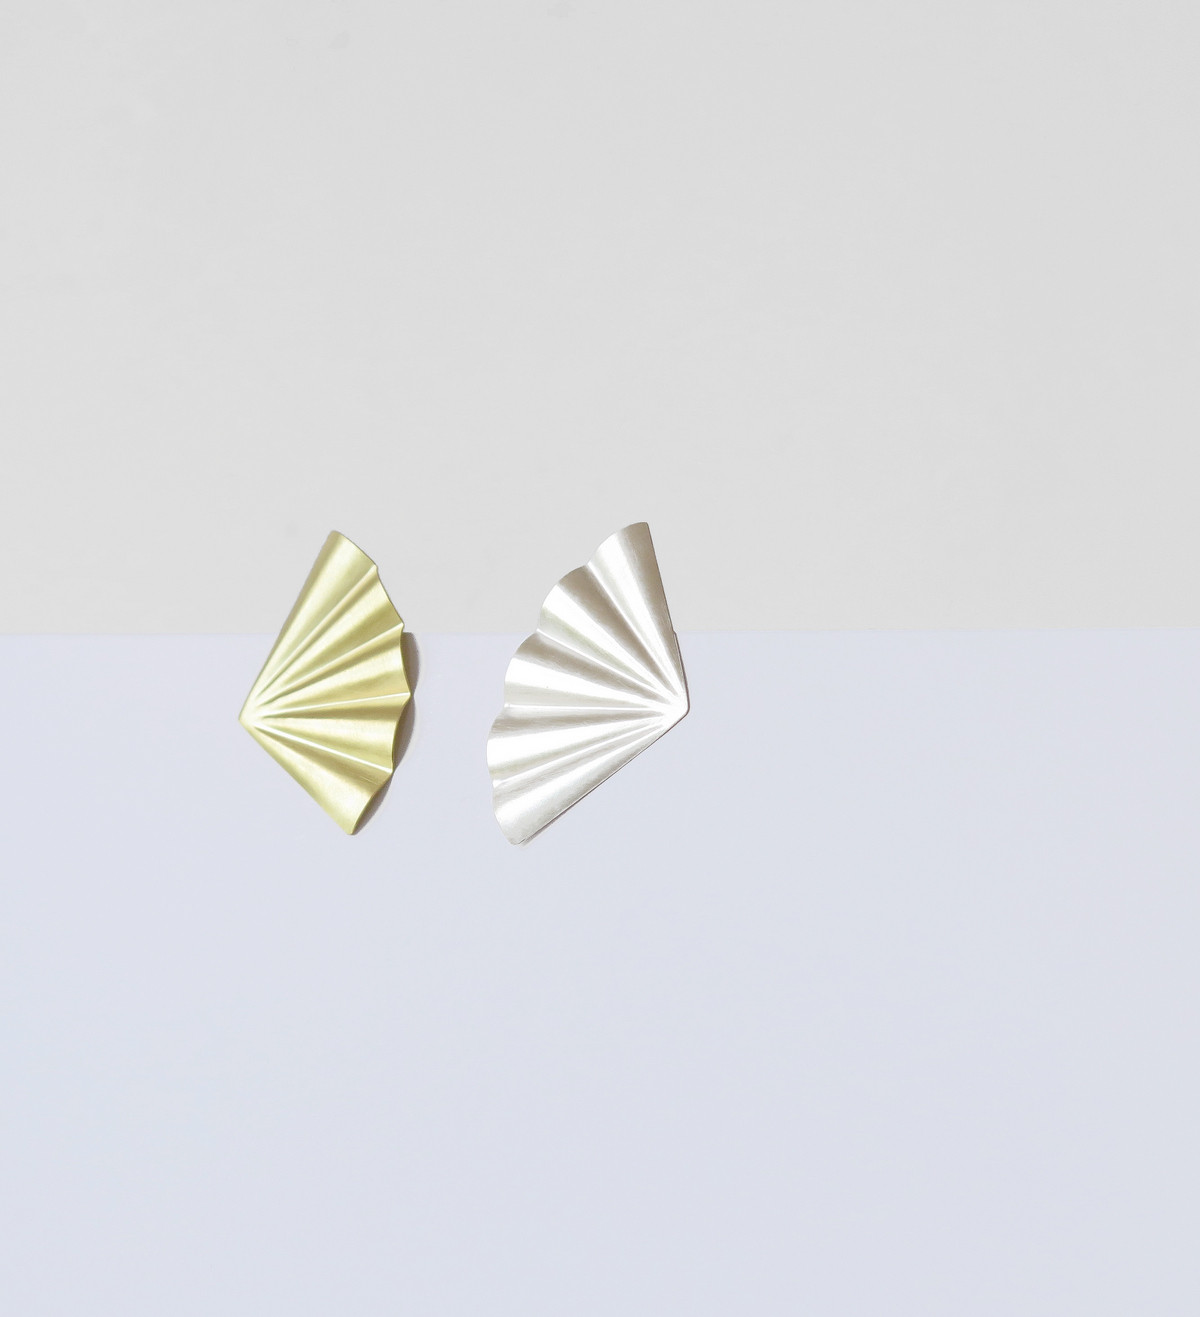 18k gold and silver earrings Maiko 43mm